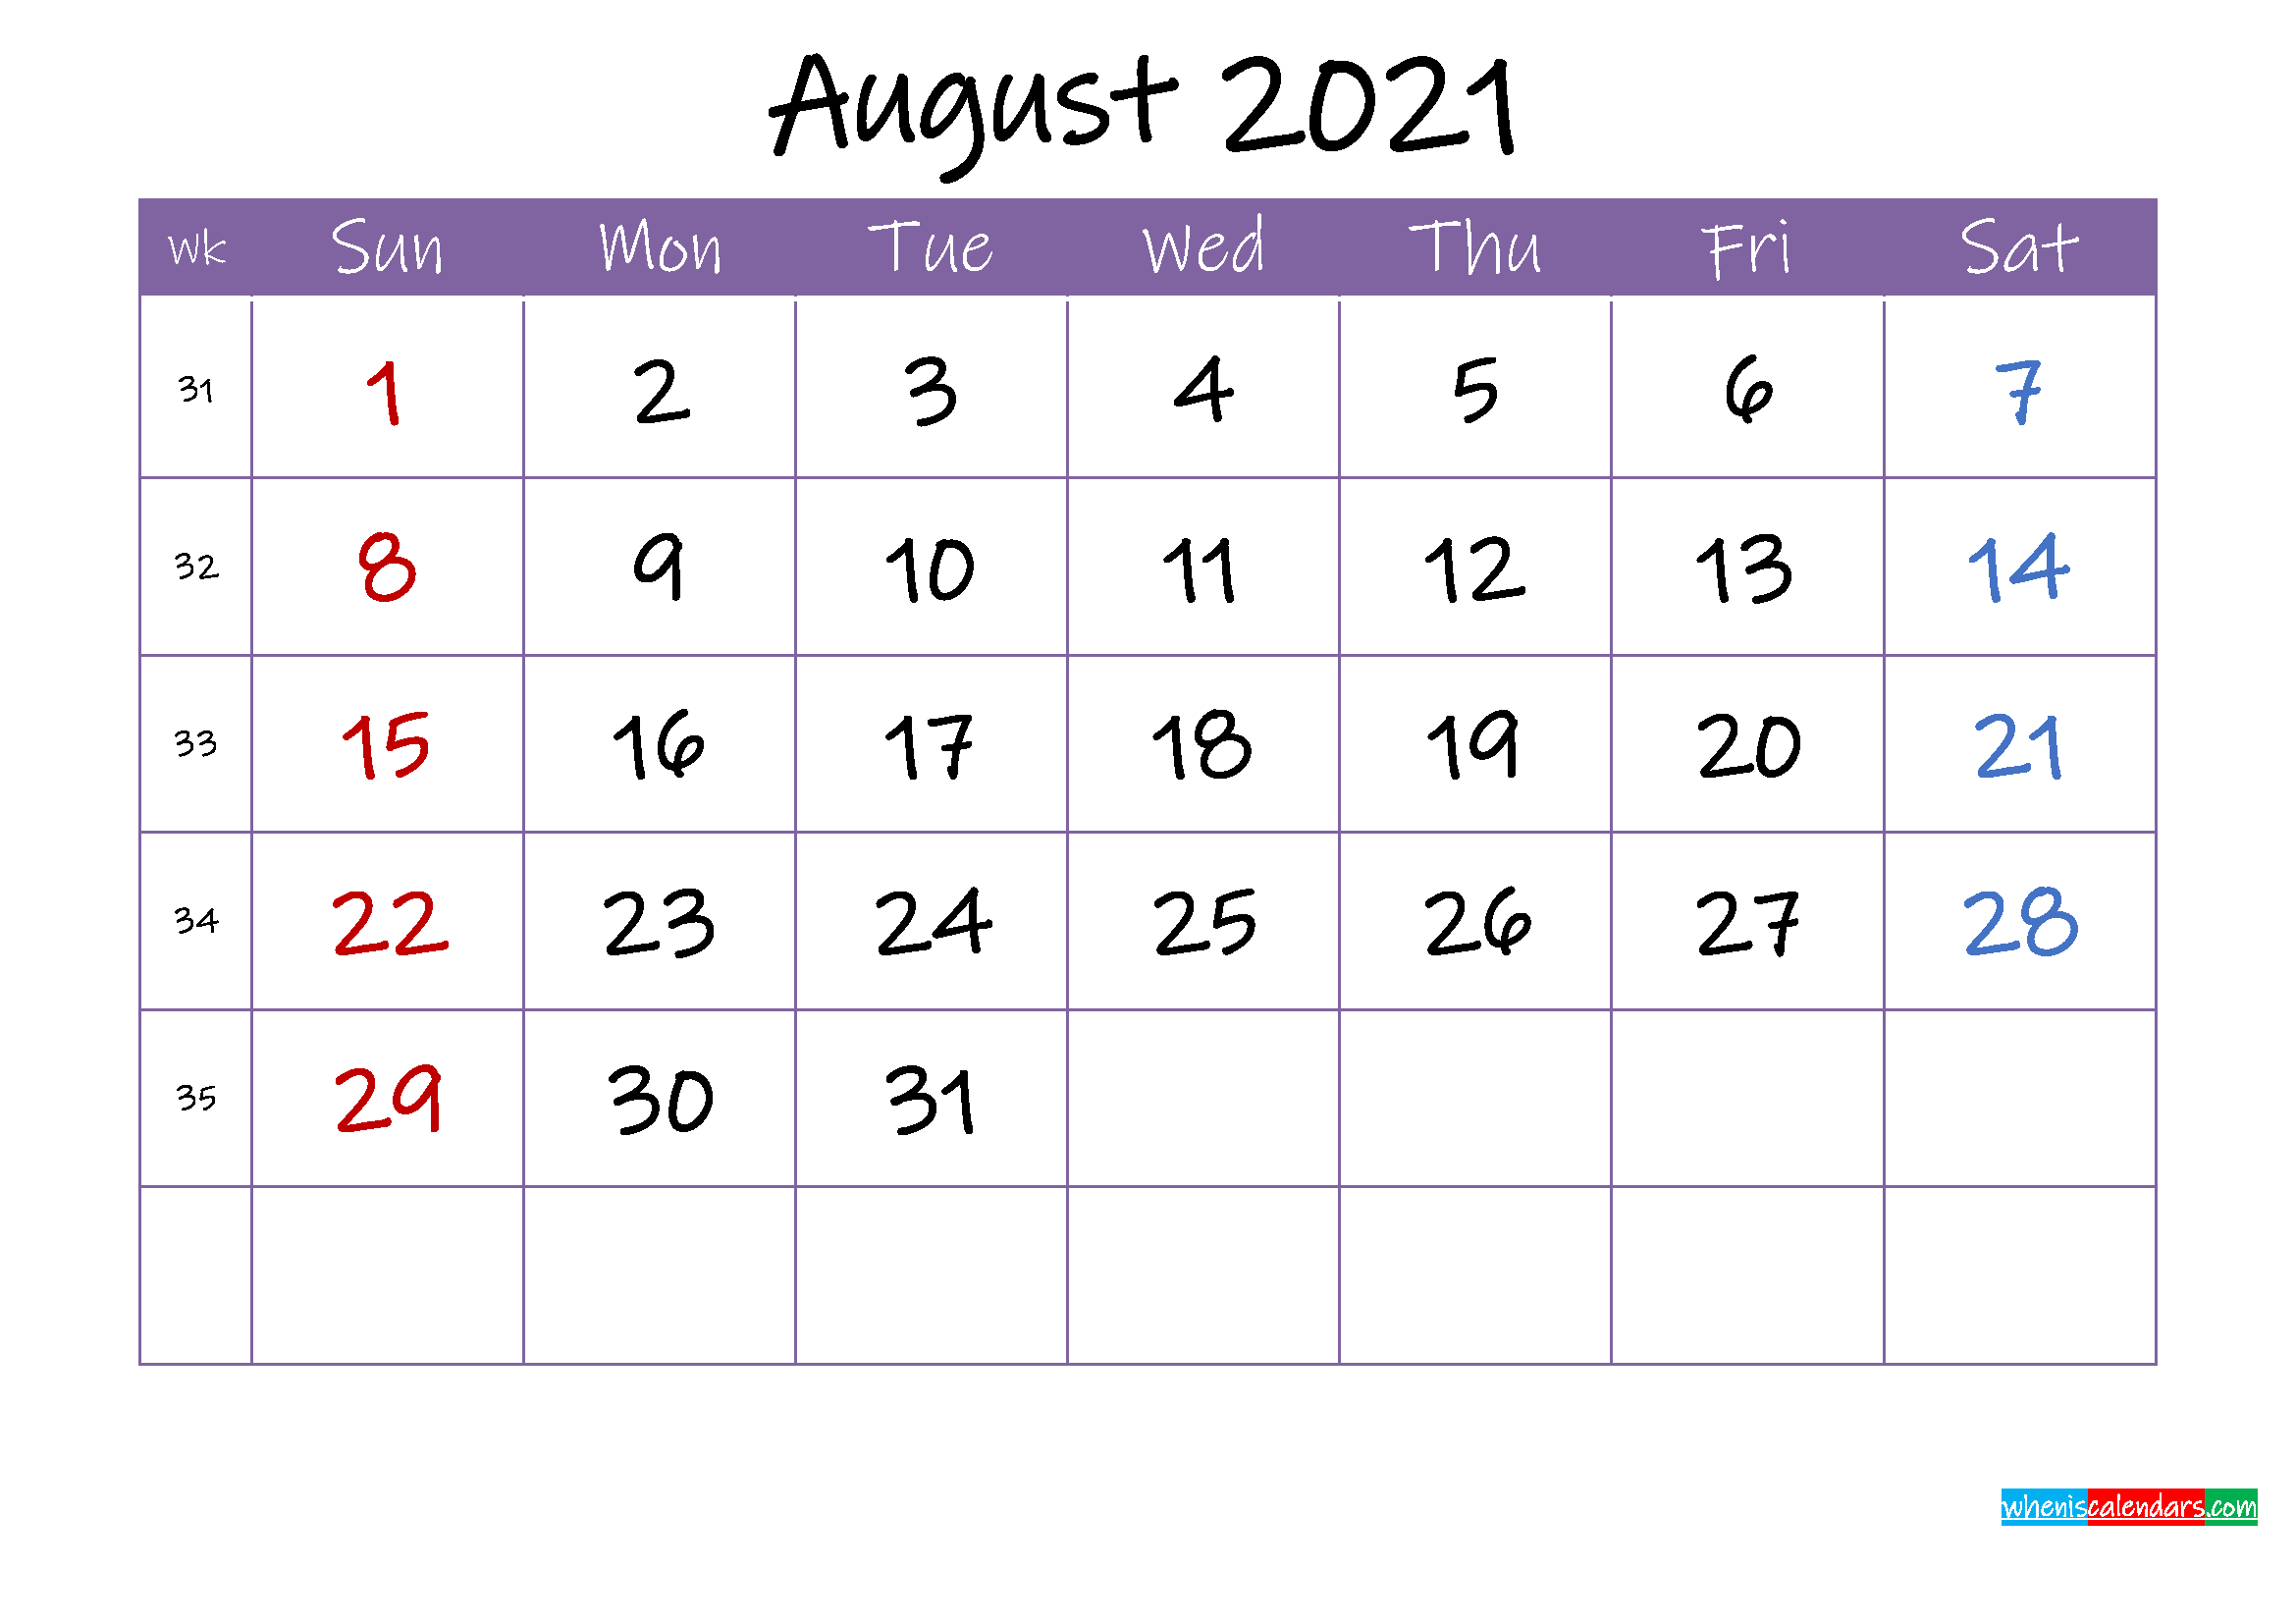 August 2021 Calendar With Holidays Printable - Template